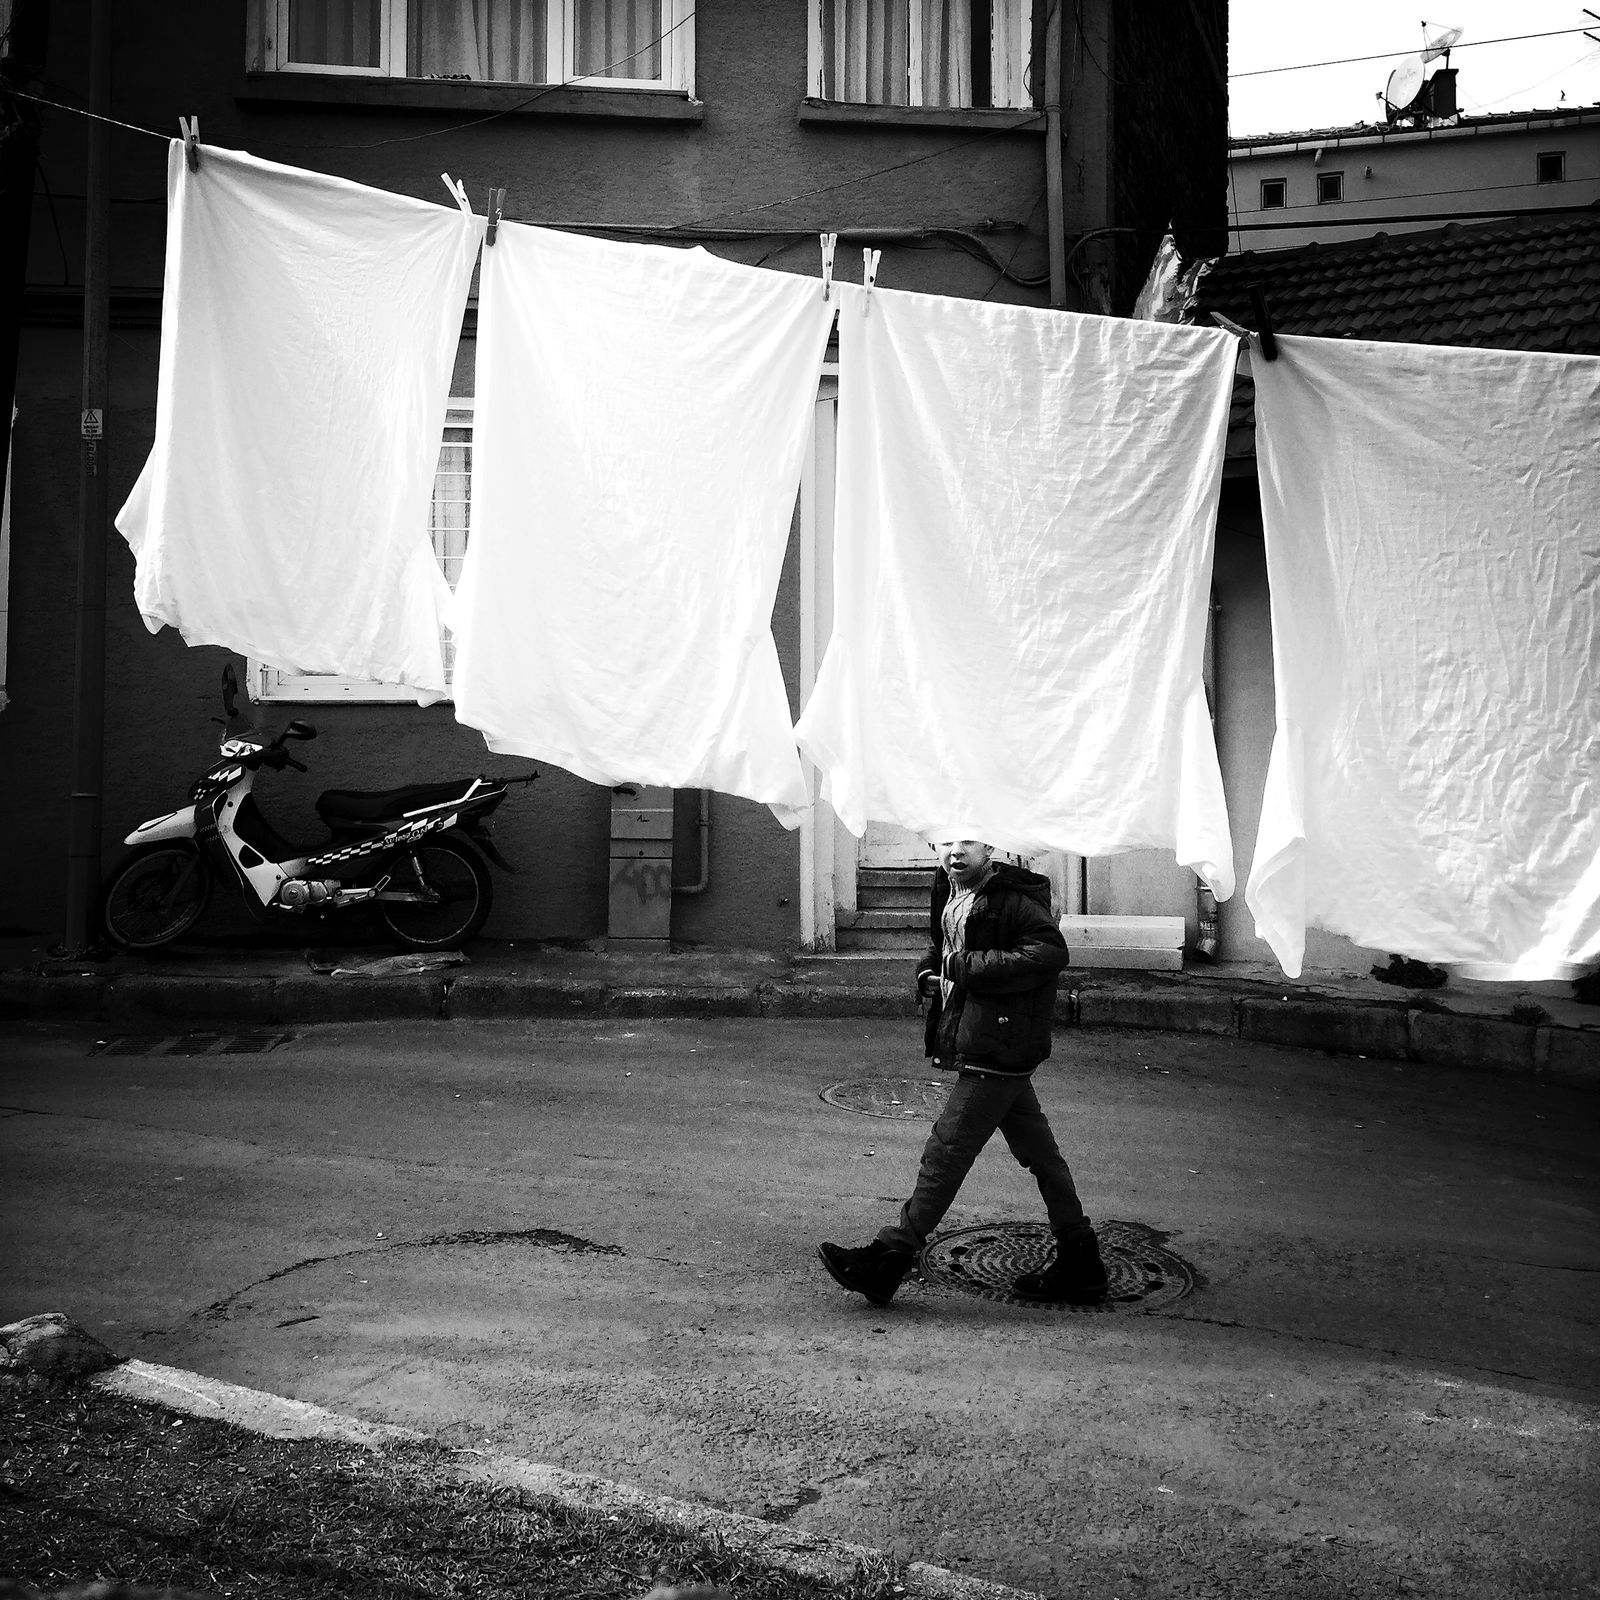 © sevil alkan - Image from the urban anımal photography project